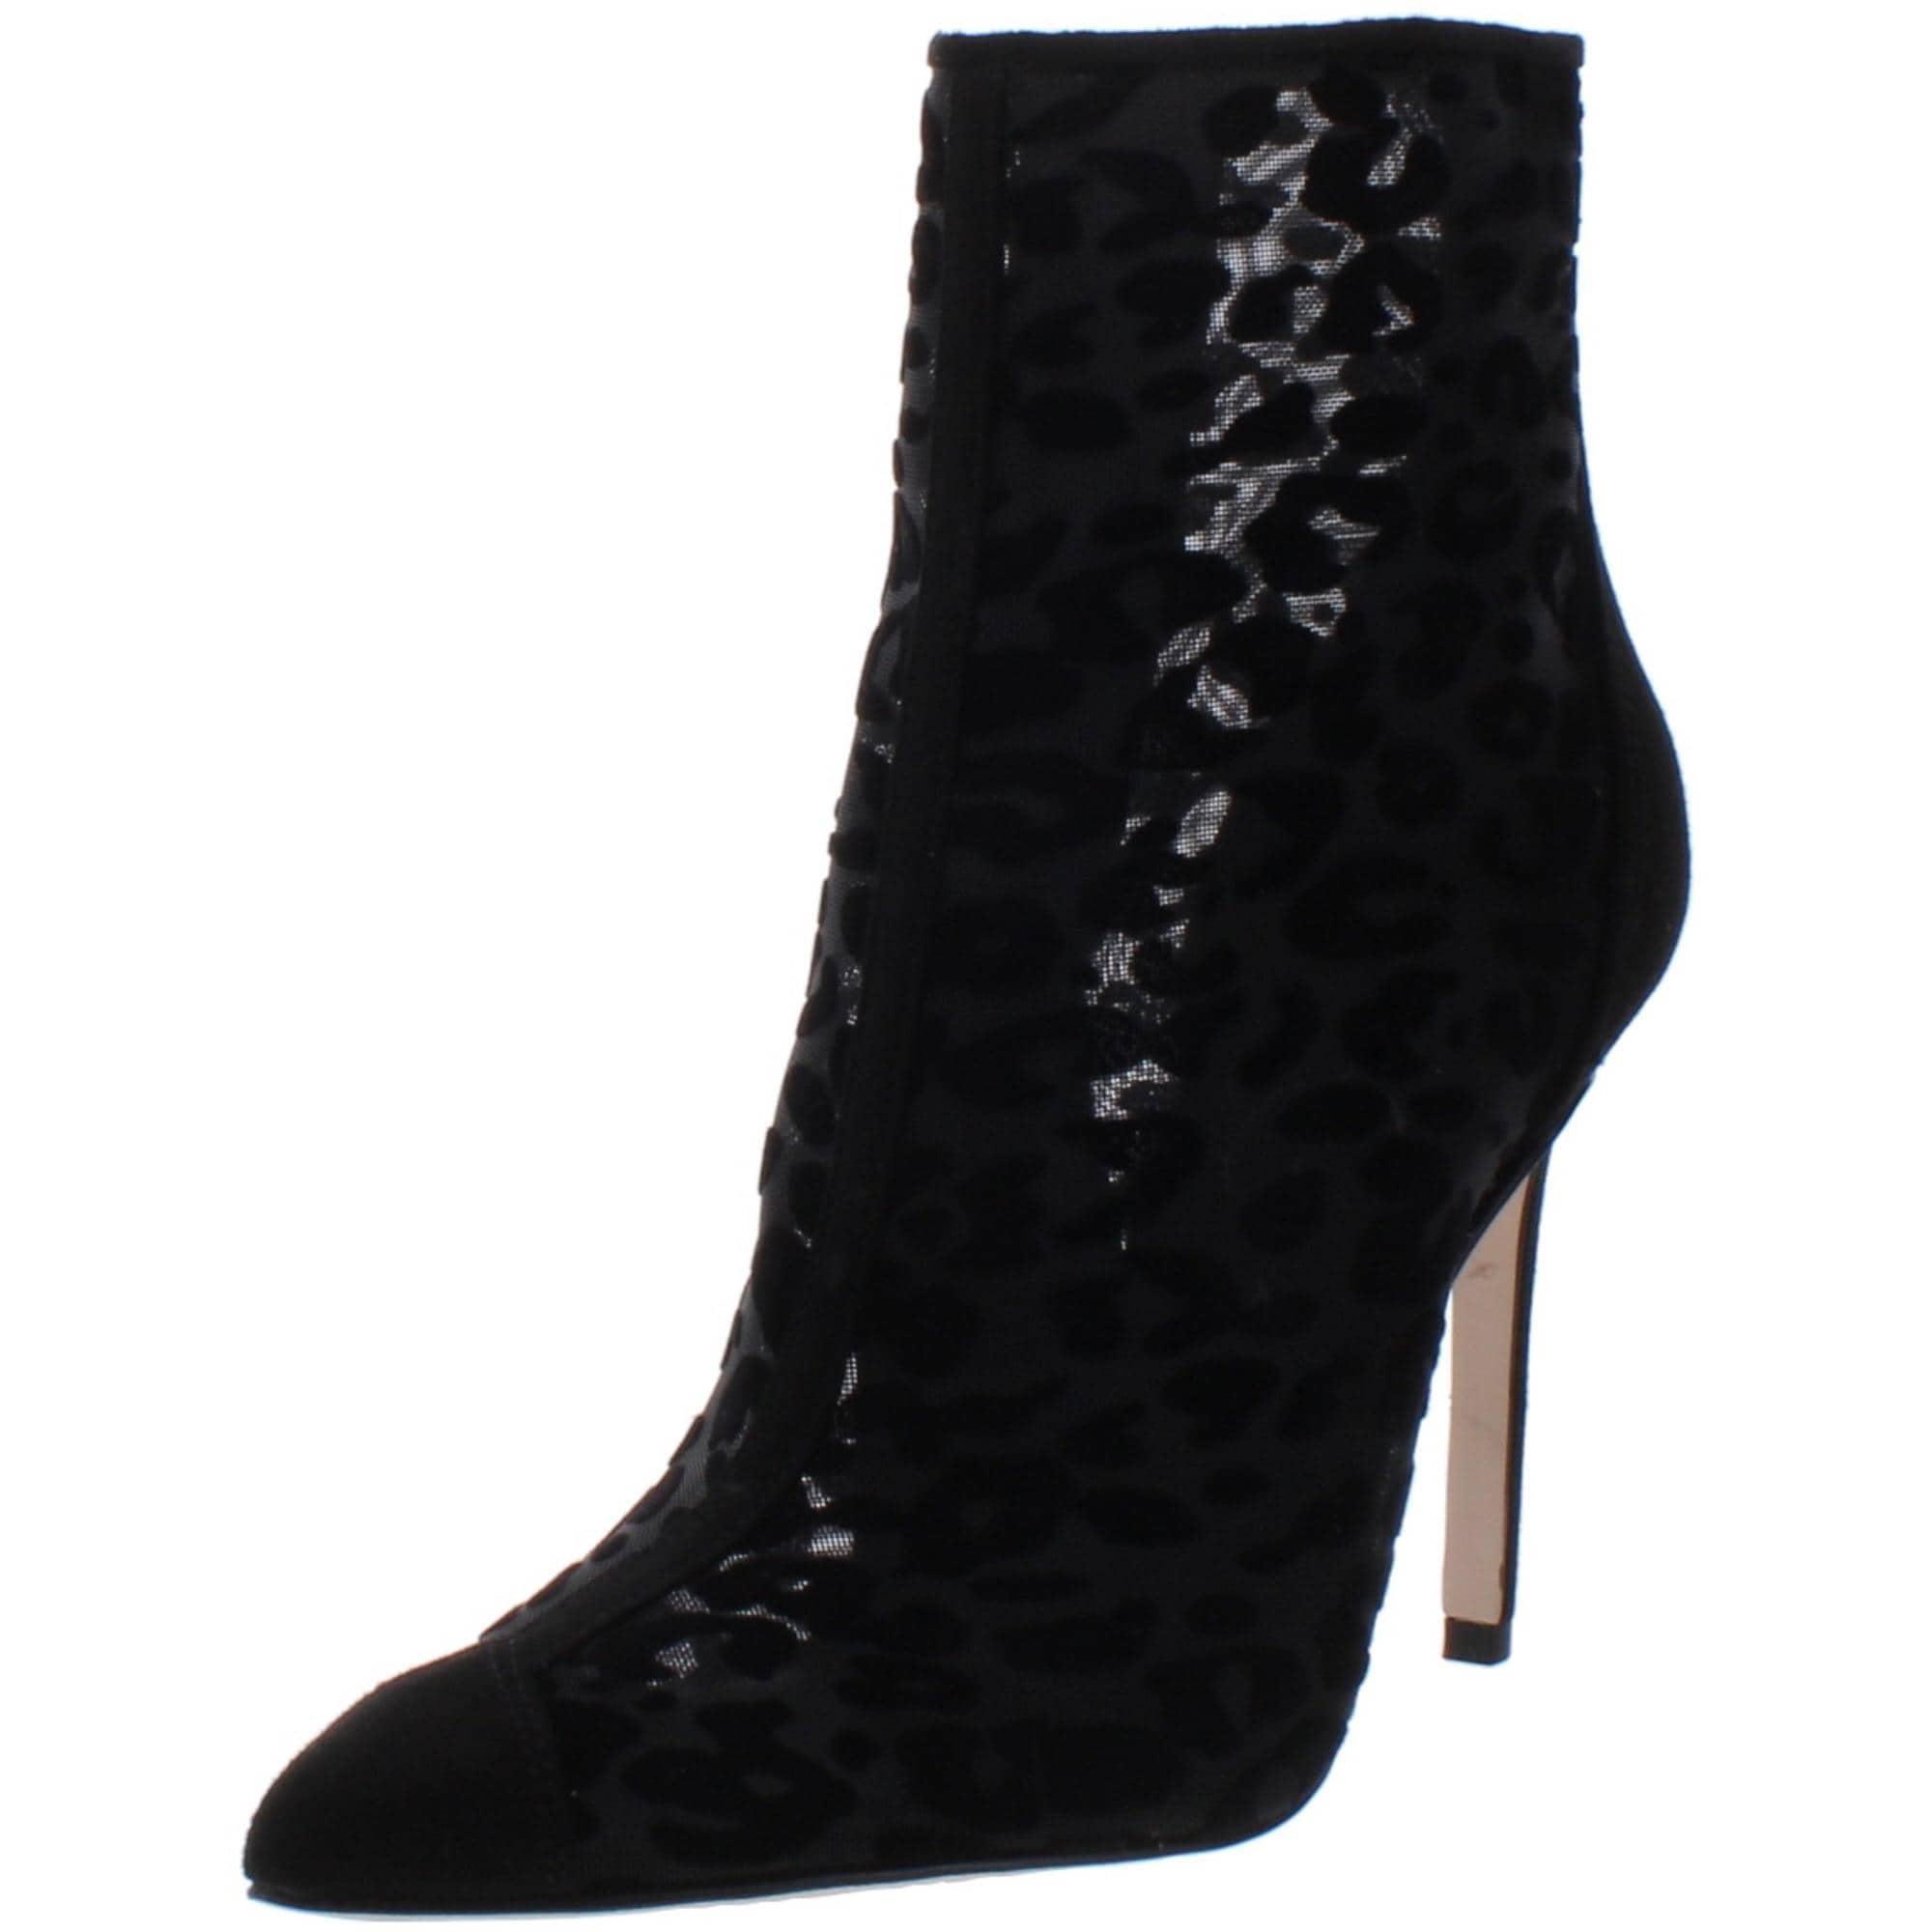 jessica simpson leopard ankle boots